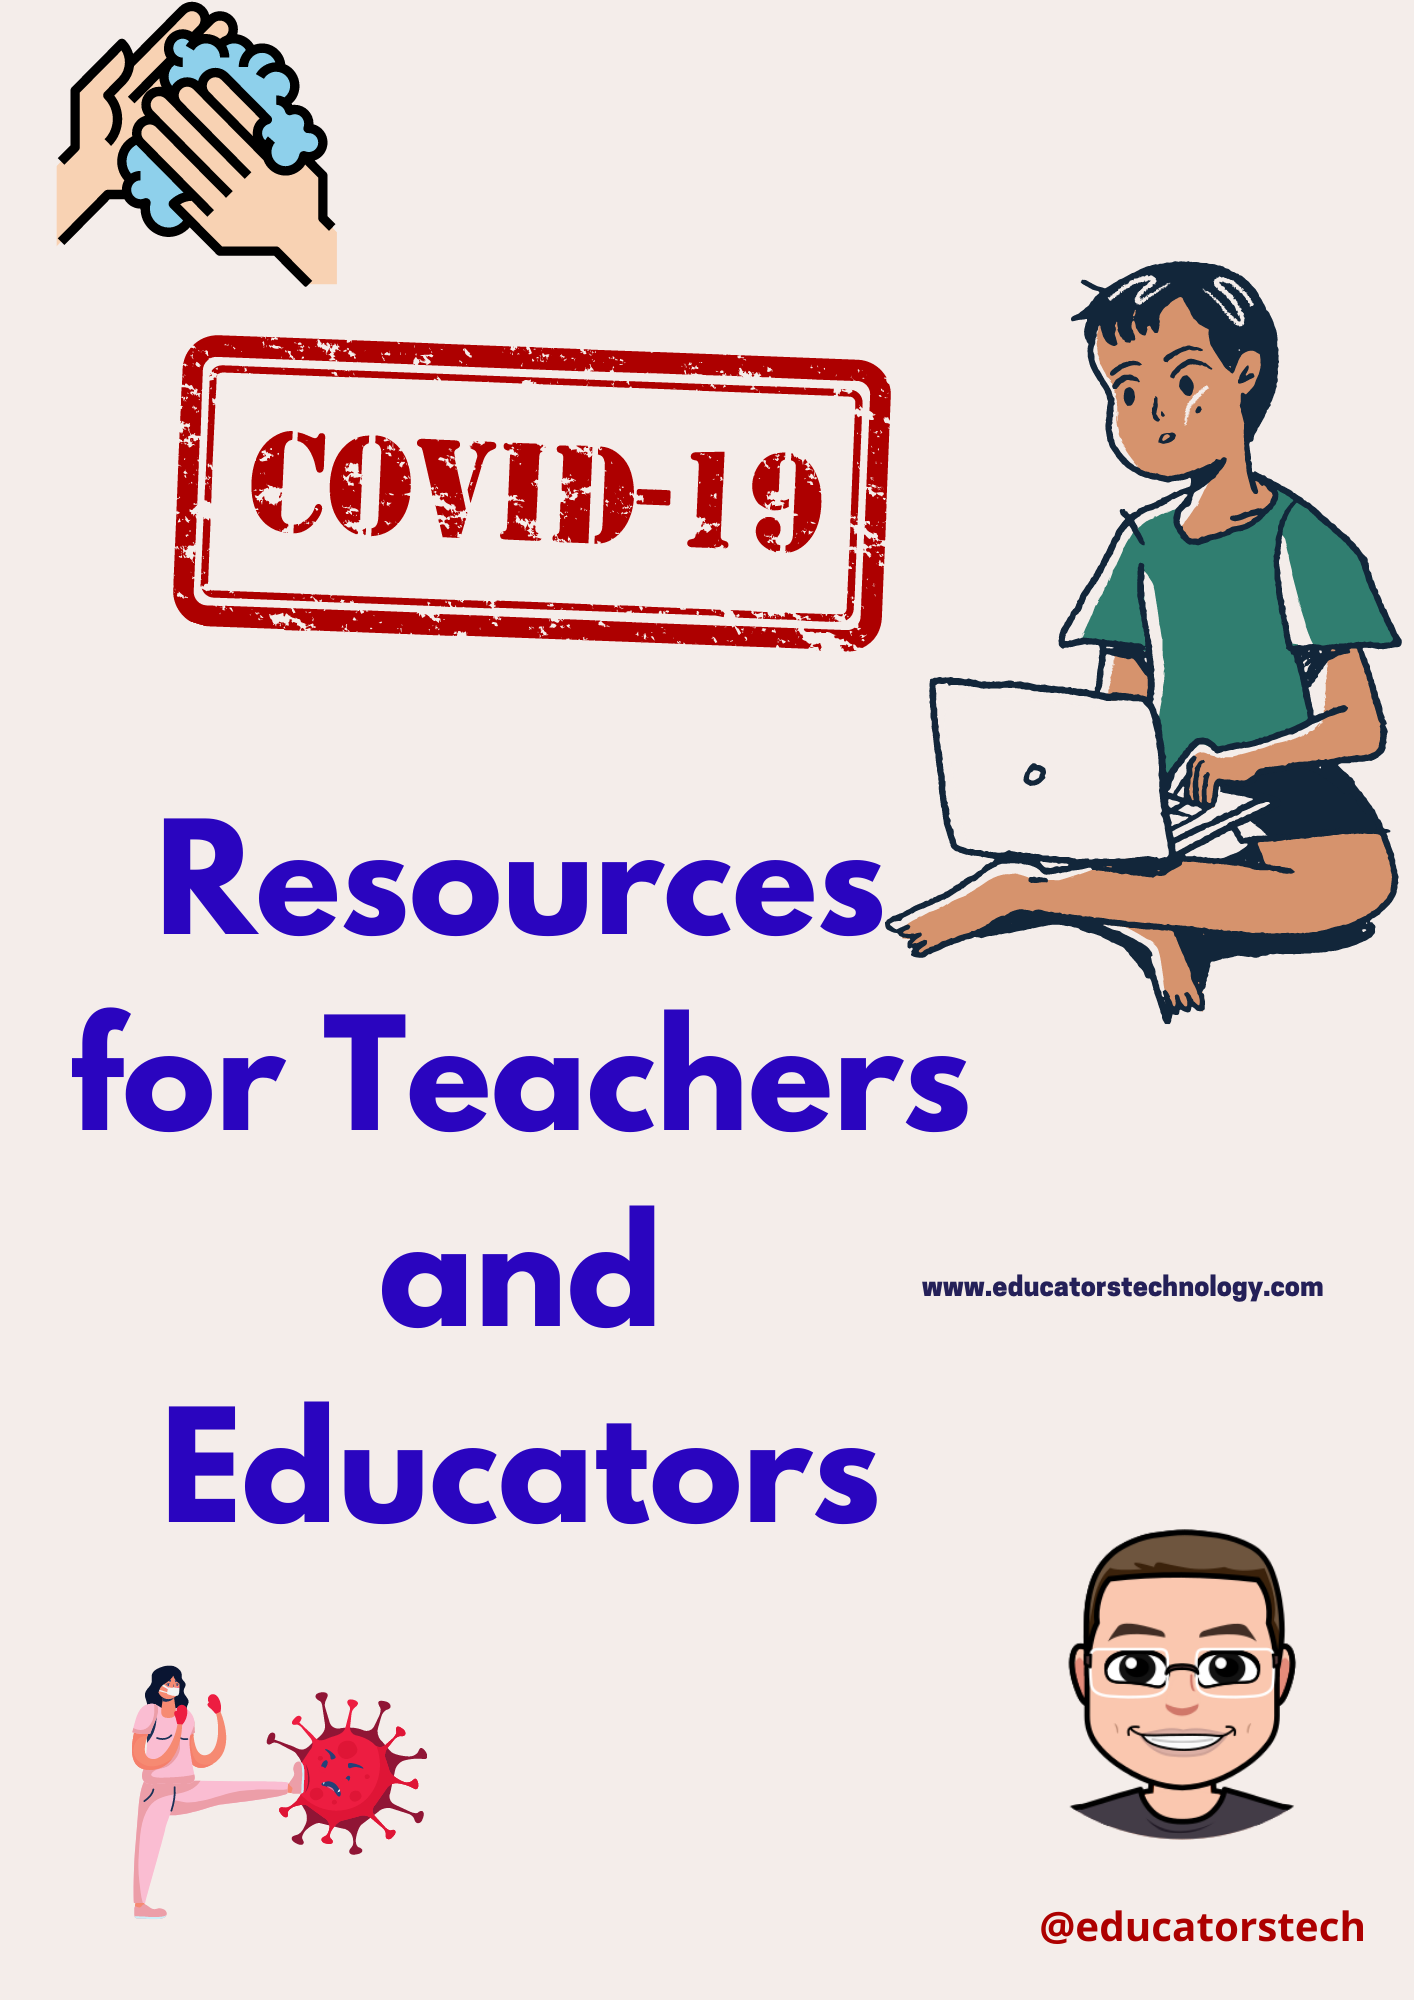 COVID-19 Resources for Teachers and Educators